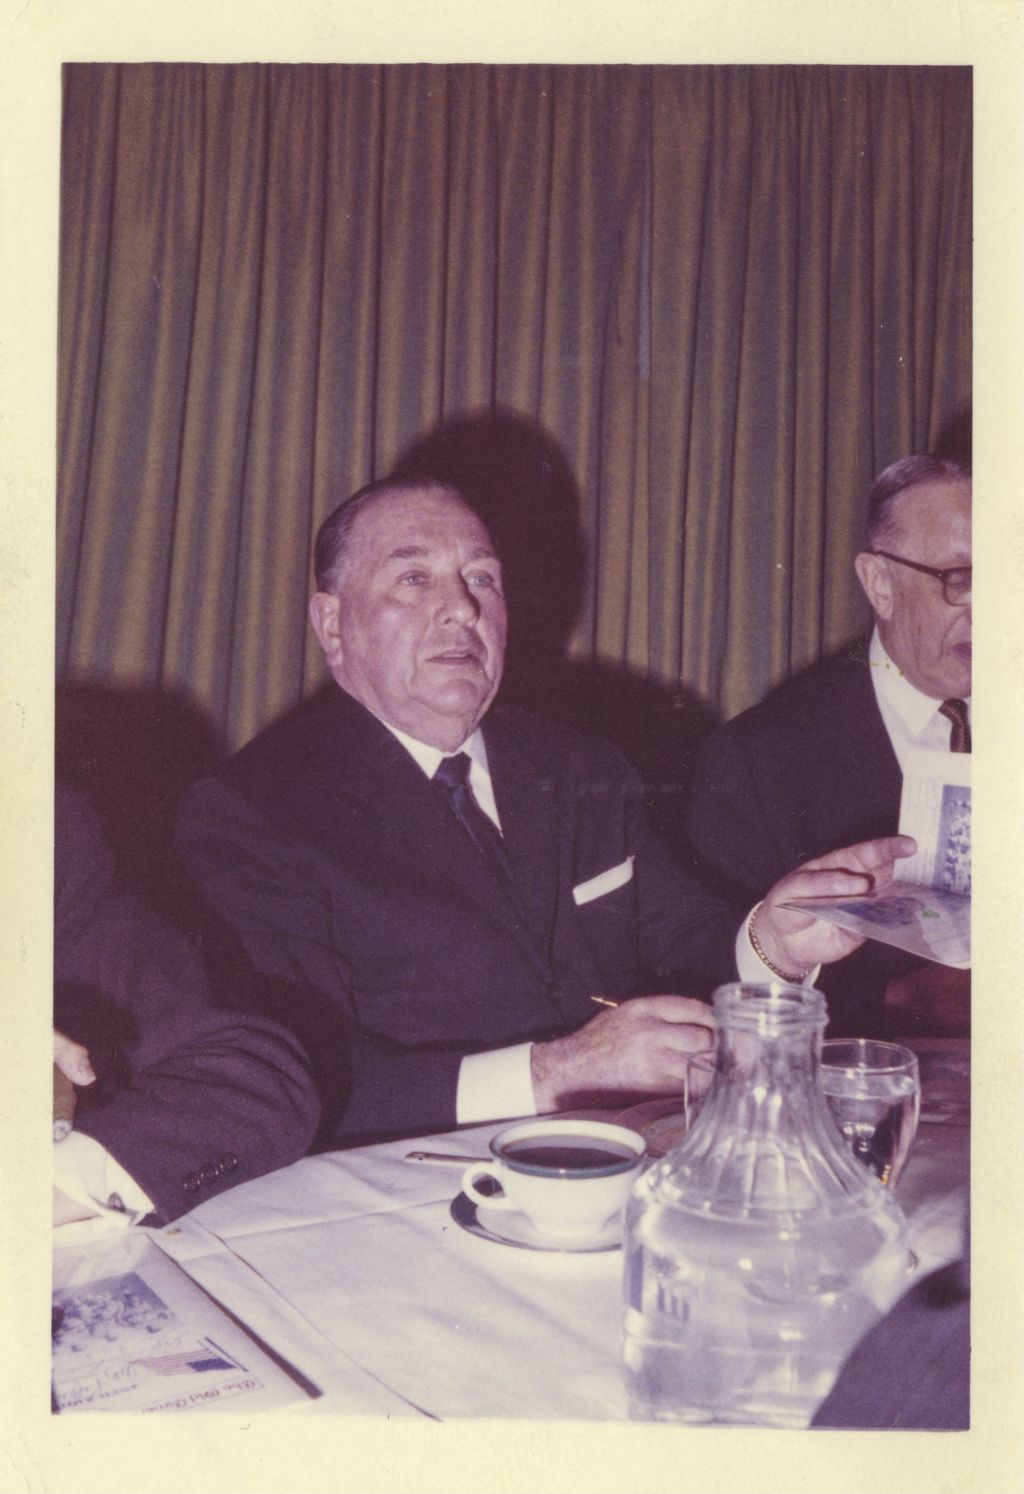 Old Timers' Baseball Association of Chicago 45th Annual dinner, Richard J. Daley